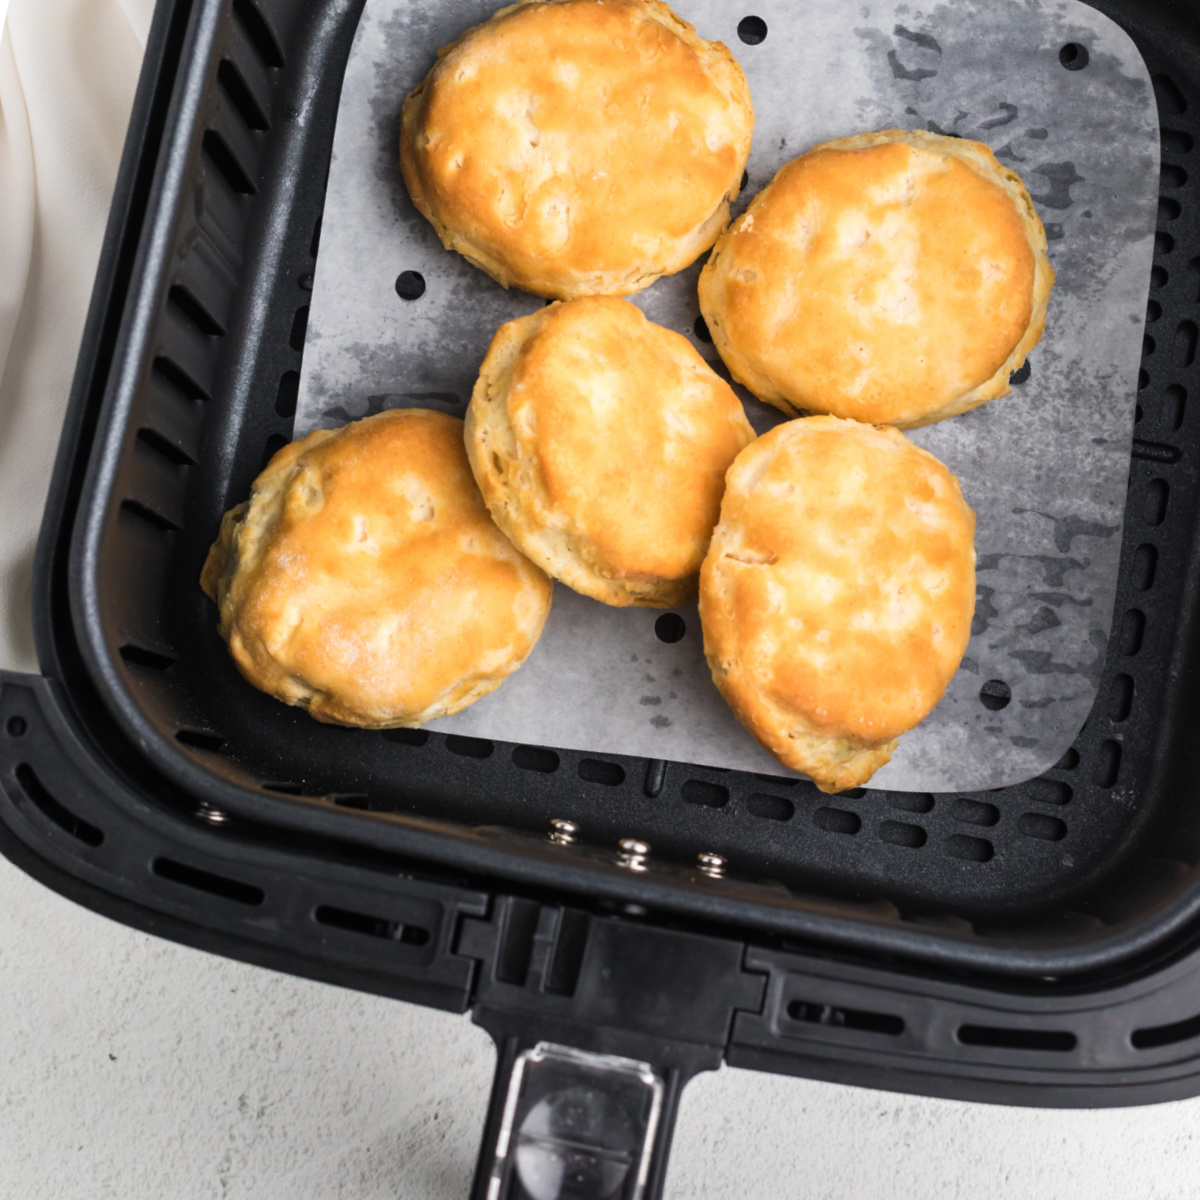 Biscuits in the Air Fryer basket after cooking.